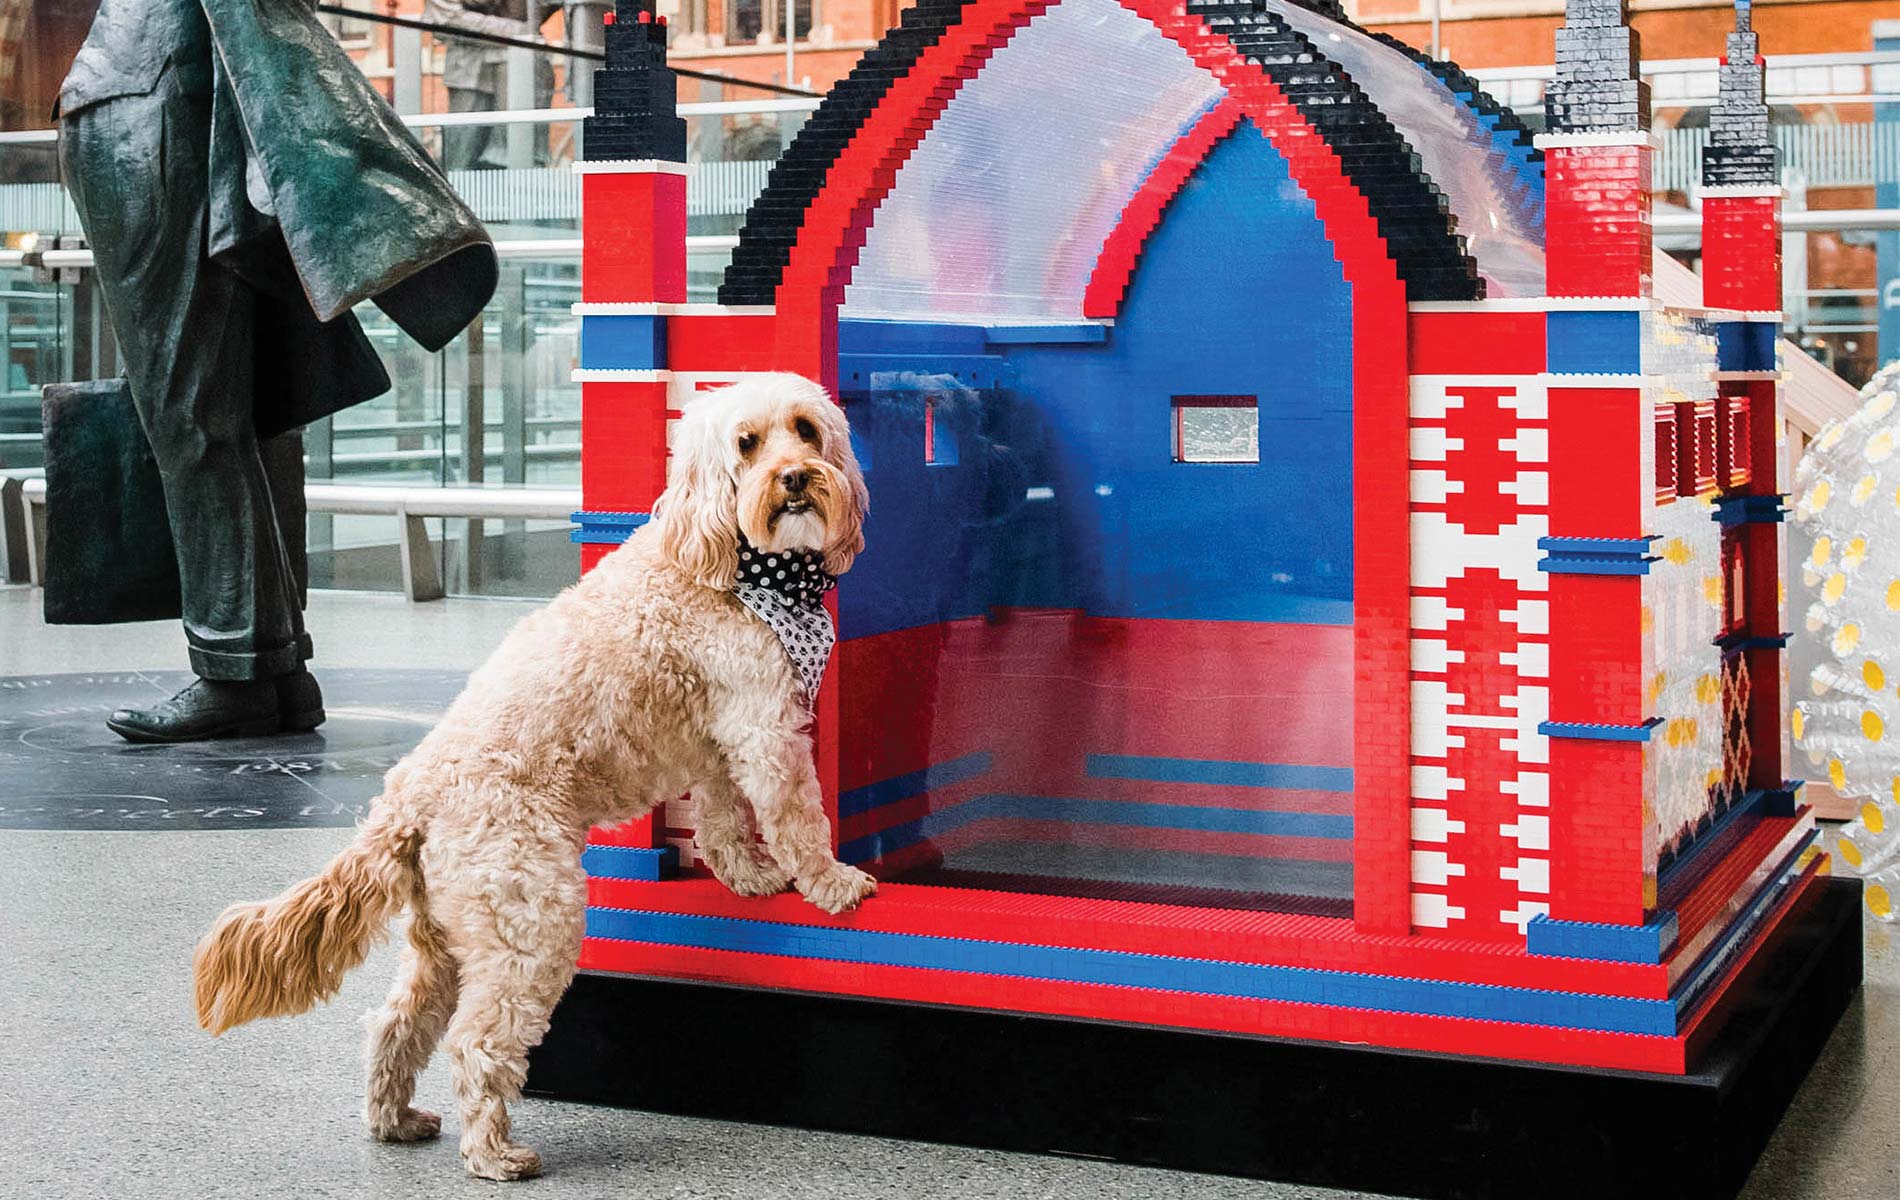 This creative example of barkitecture was made from Legos for the 2018 BowWow Haus and displayed at Saint Pancras International Railway Station, London.